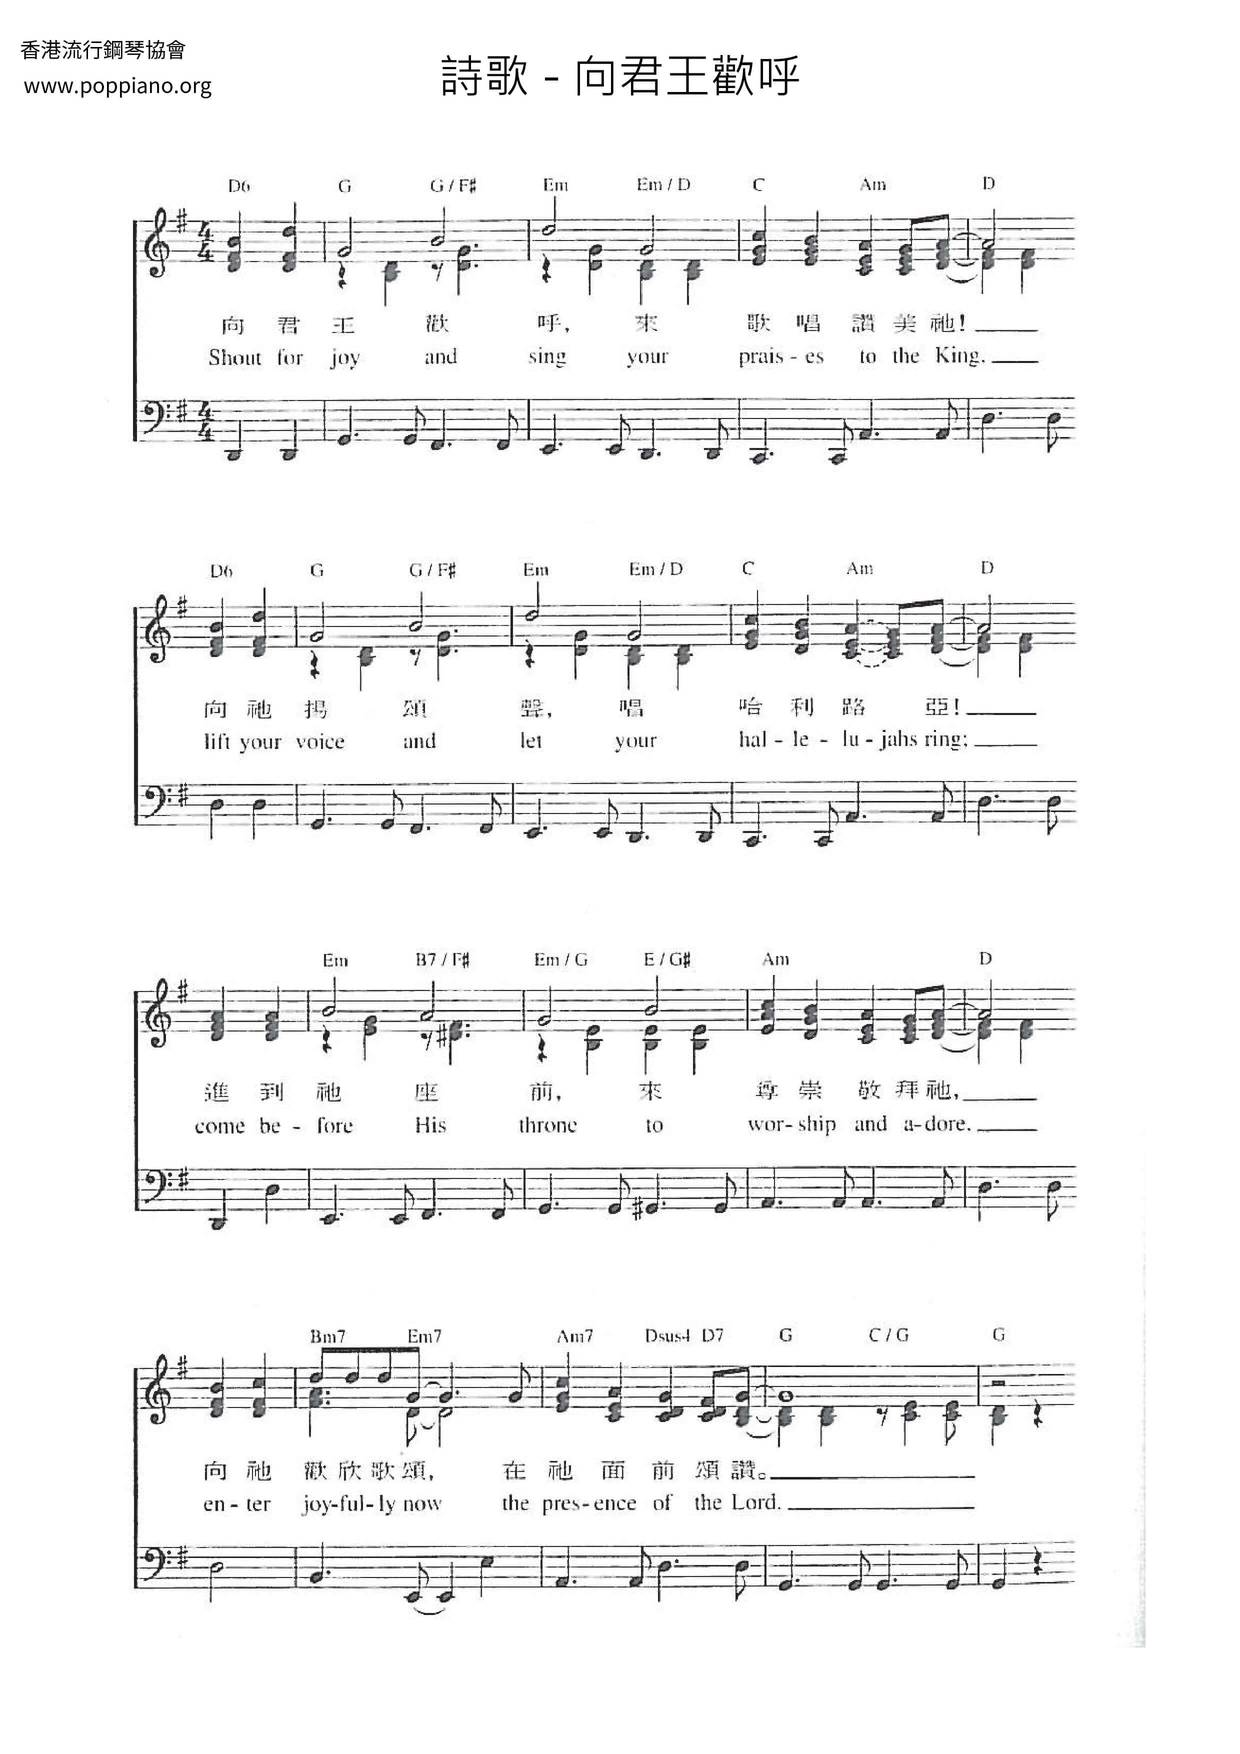 Shout for Joy Trumpet Fanfare and Melody Sheet music for Piano